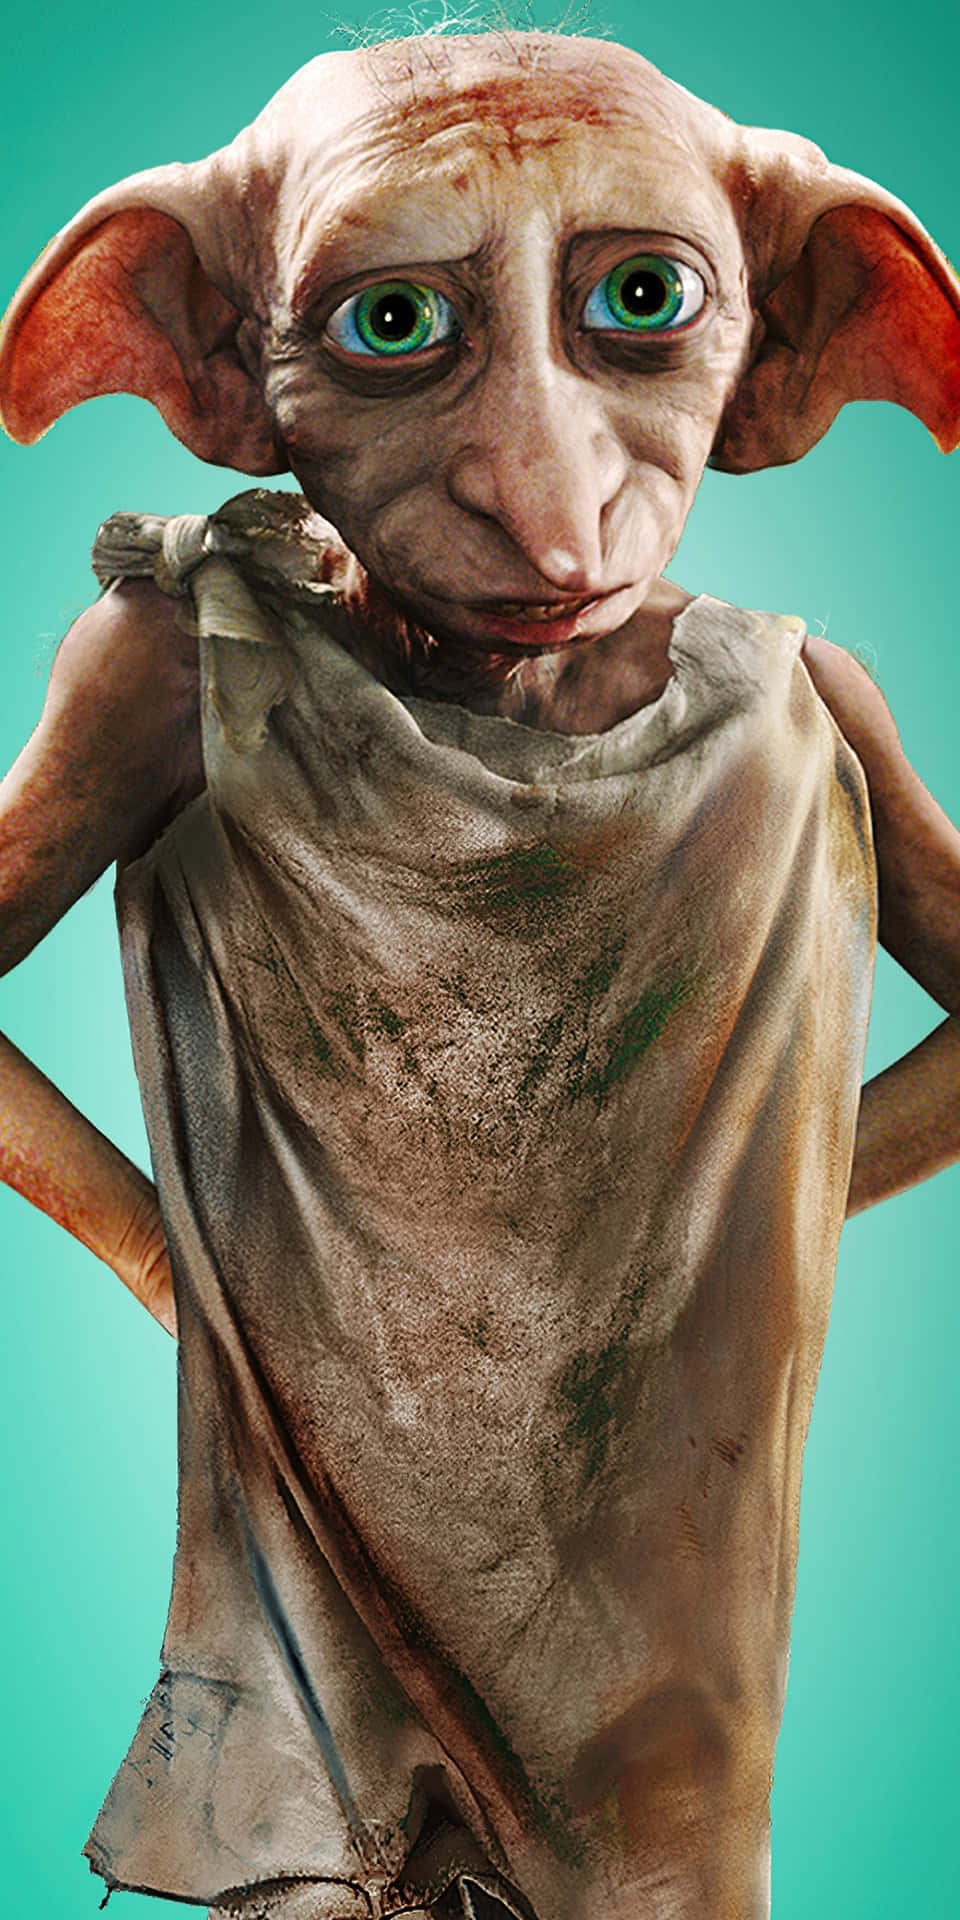 Saying Goodbye To Dobby The House-Elf Wallpaper